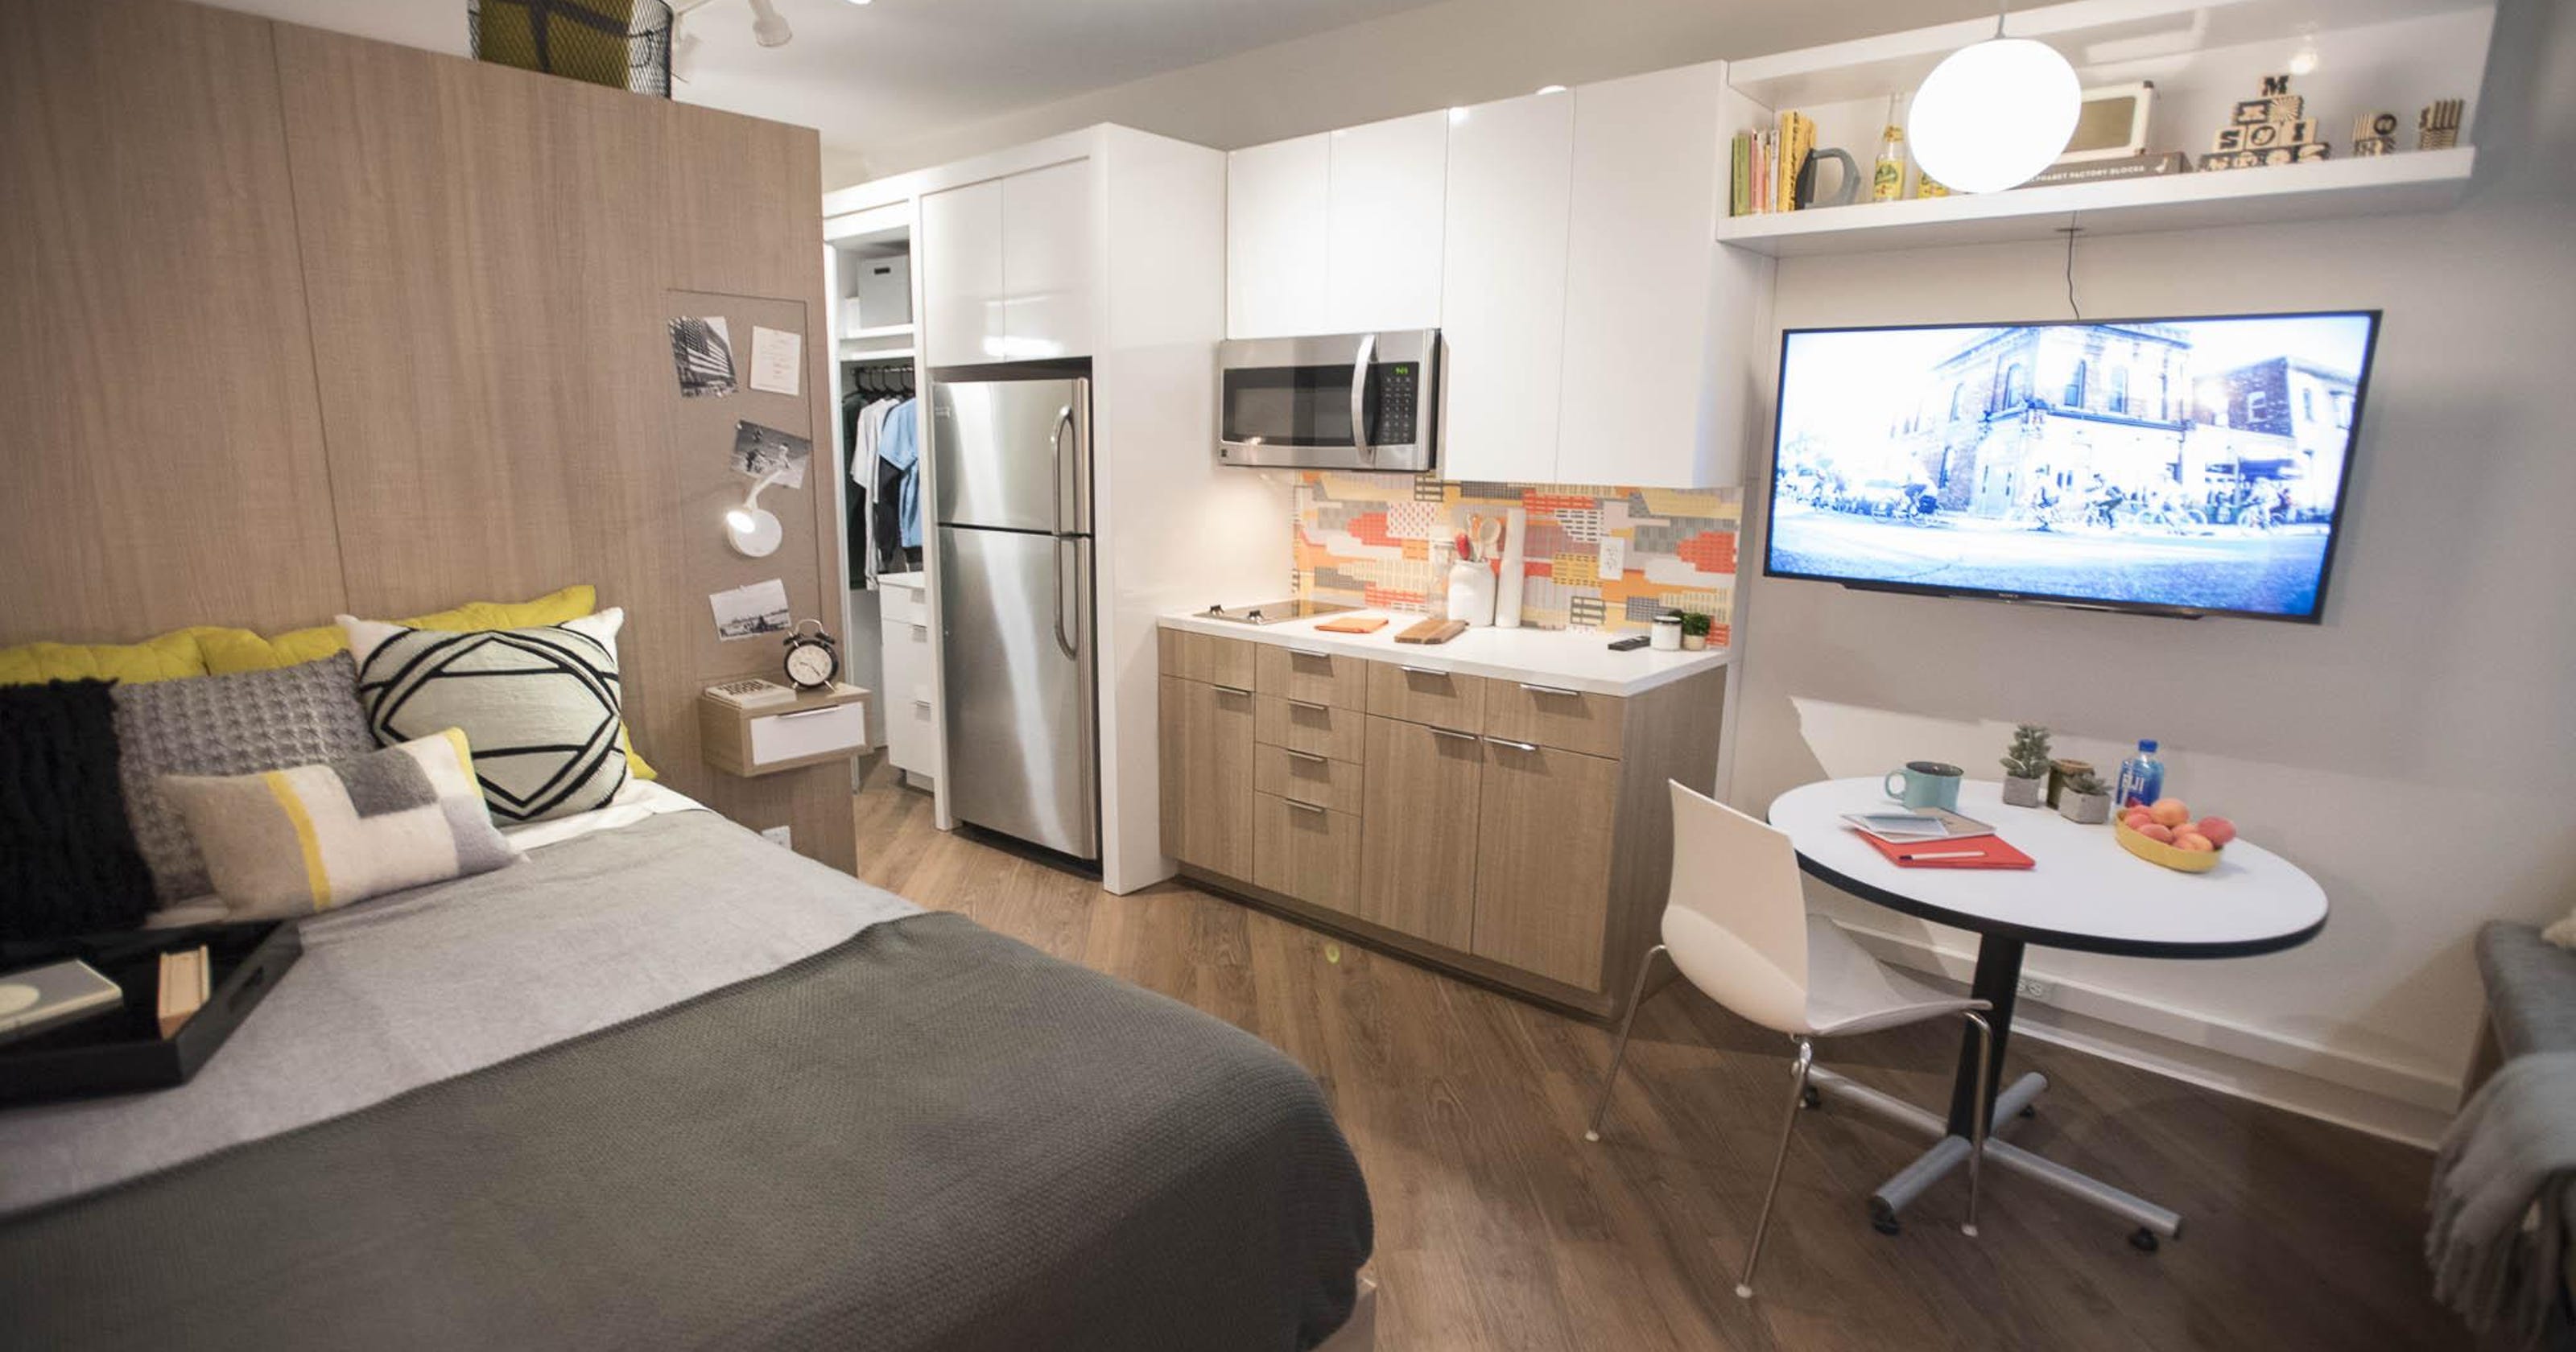 Gilbert s micro apartments  aim for efficiency downtown